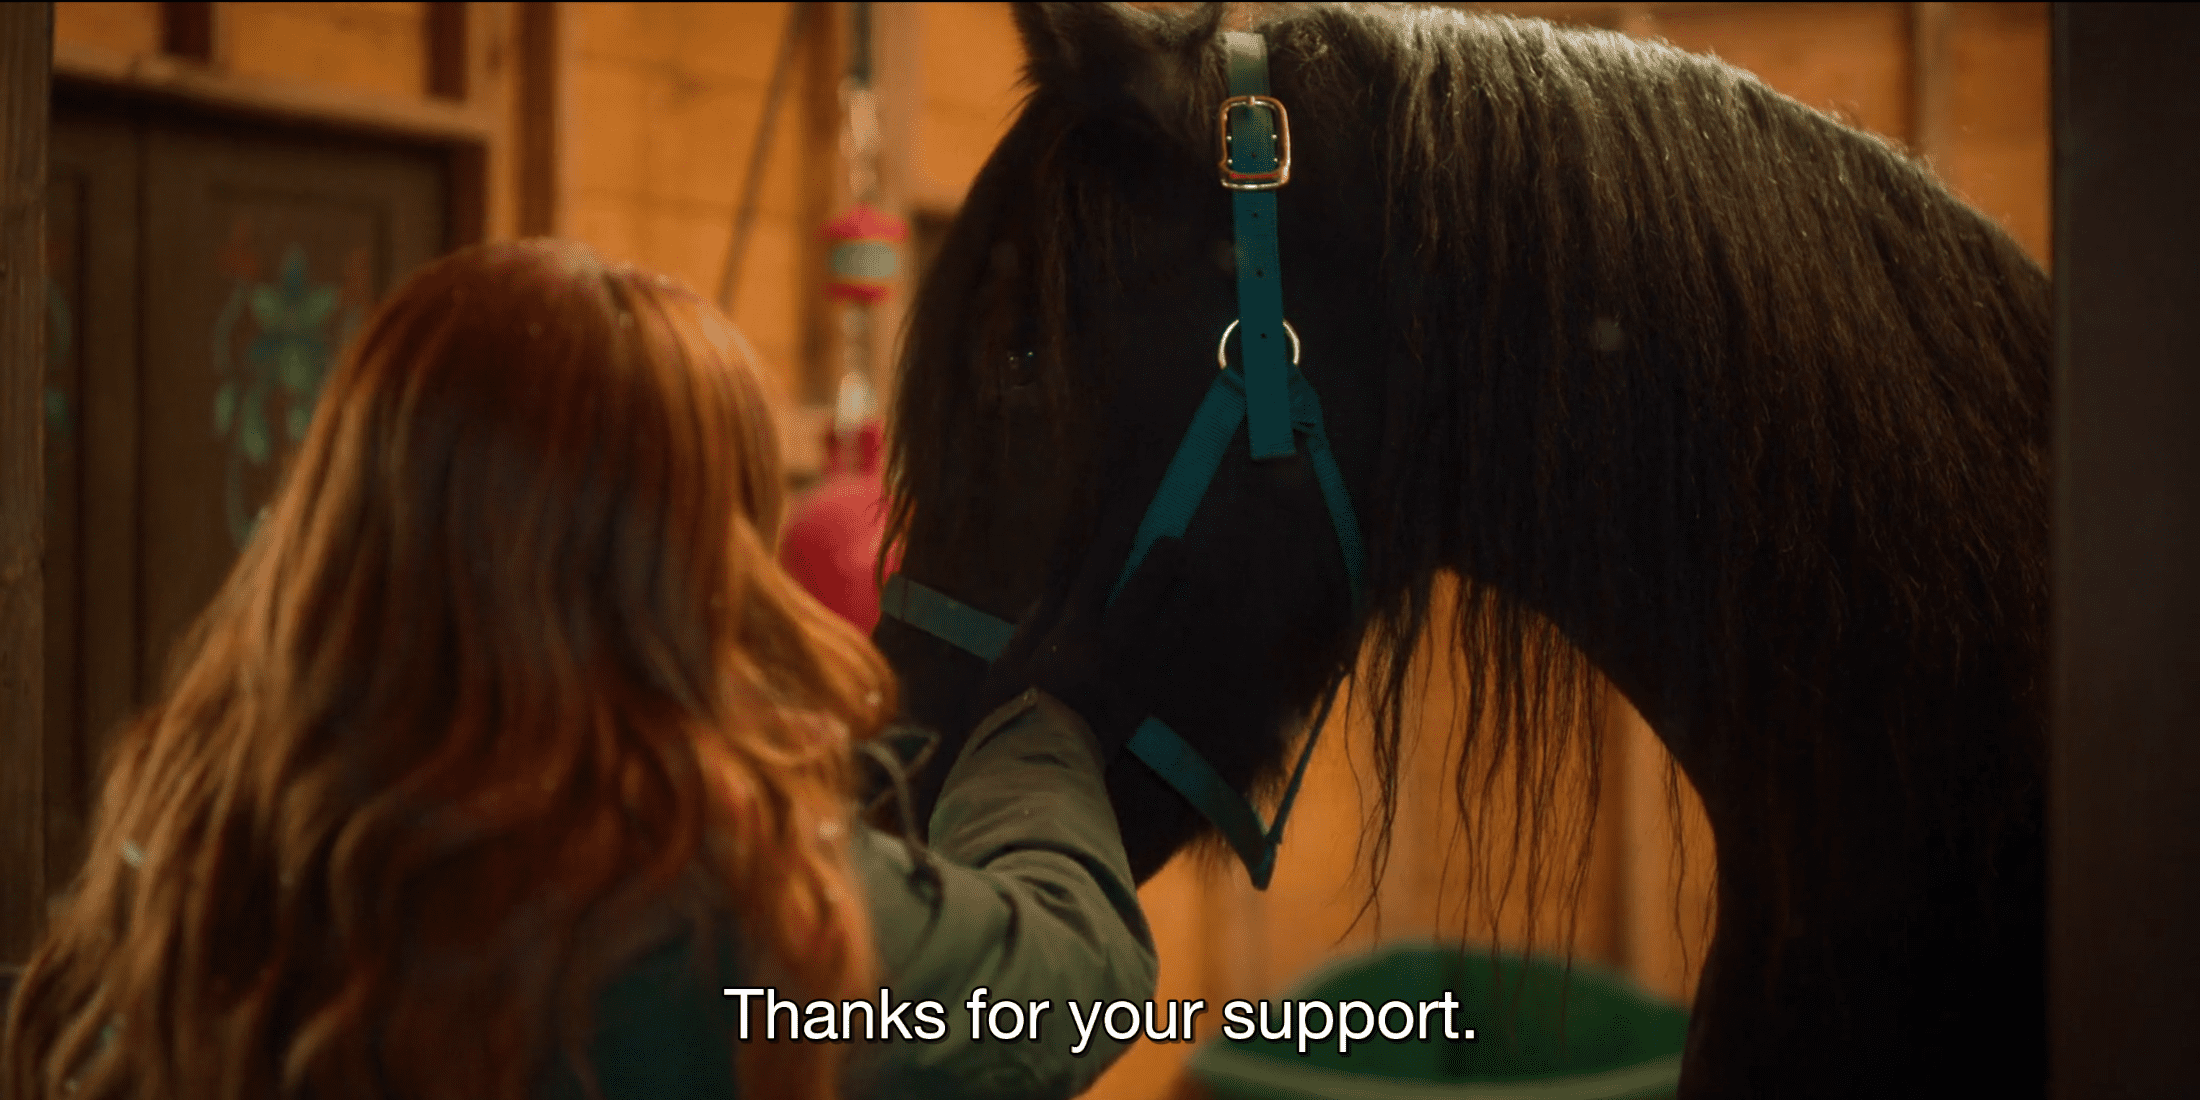 "Thanks for your support," Sierra says to a horse